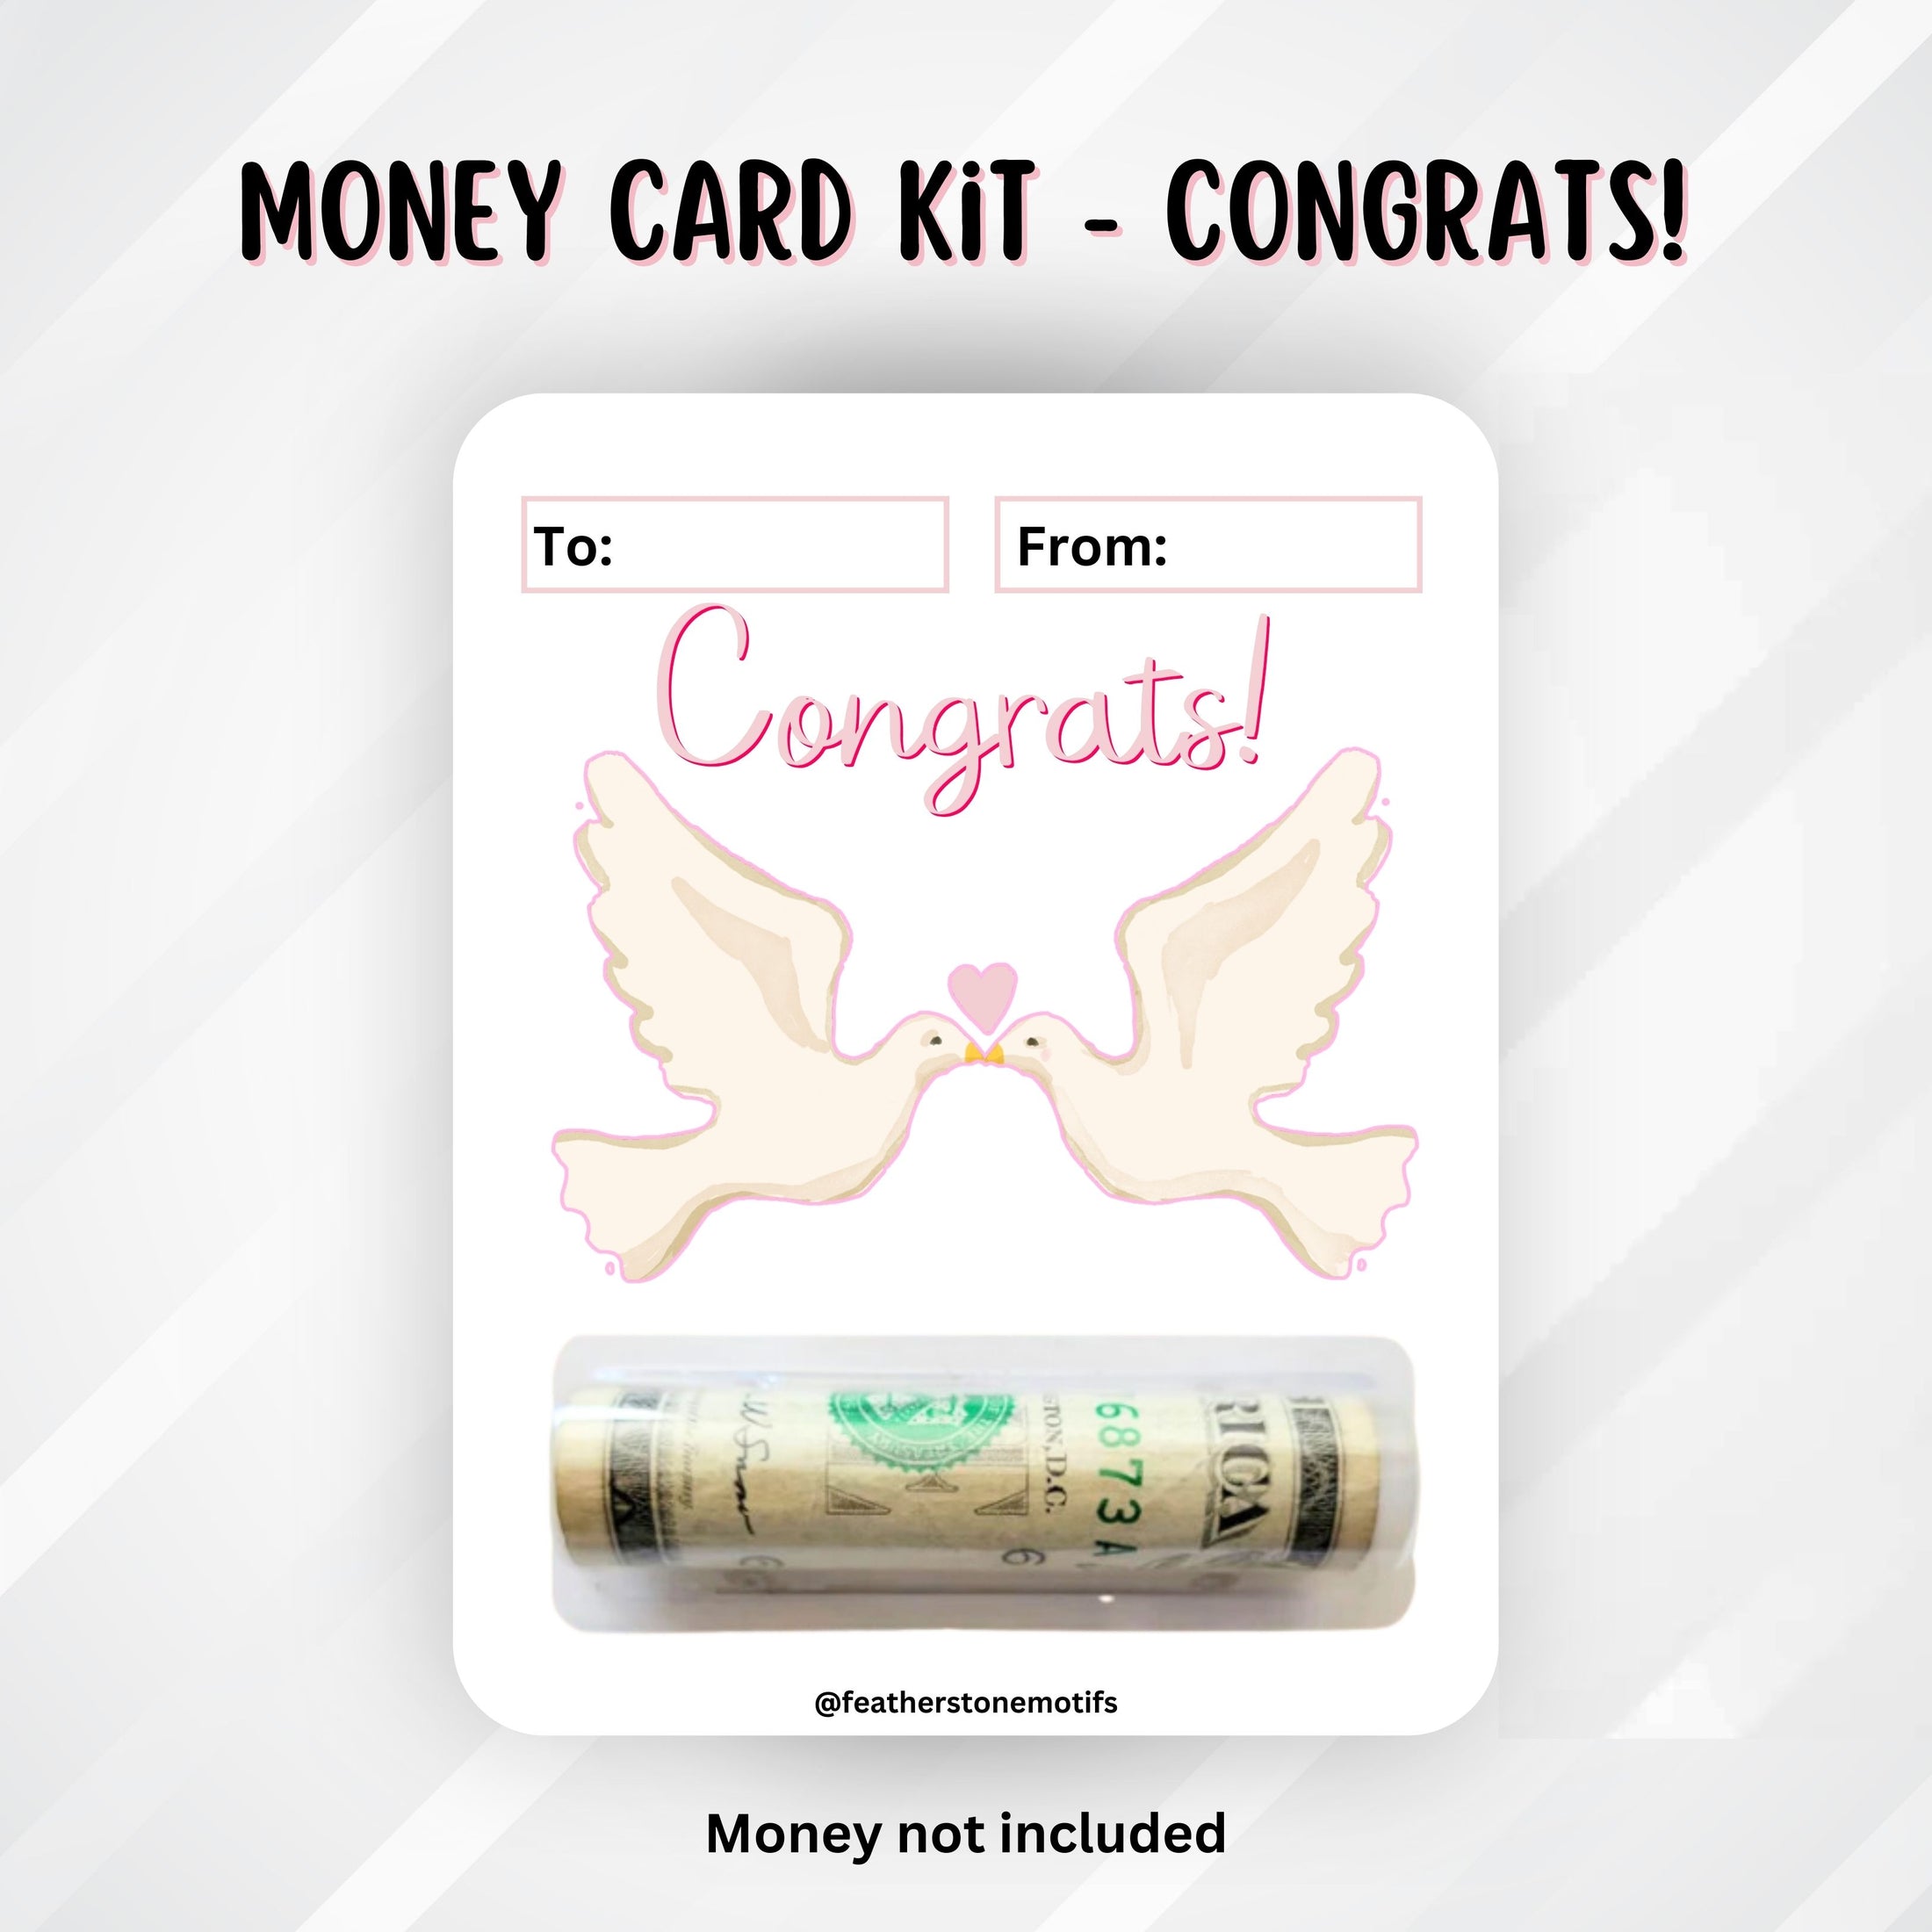 This image shows the money tube attached to the Congrats! Money Card.